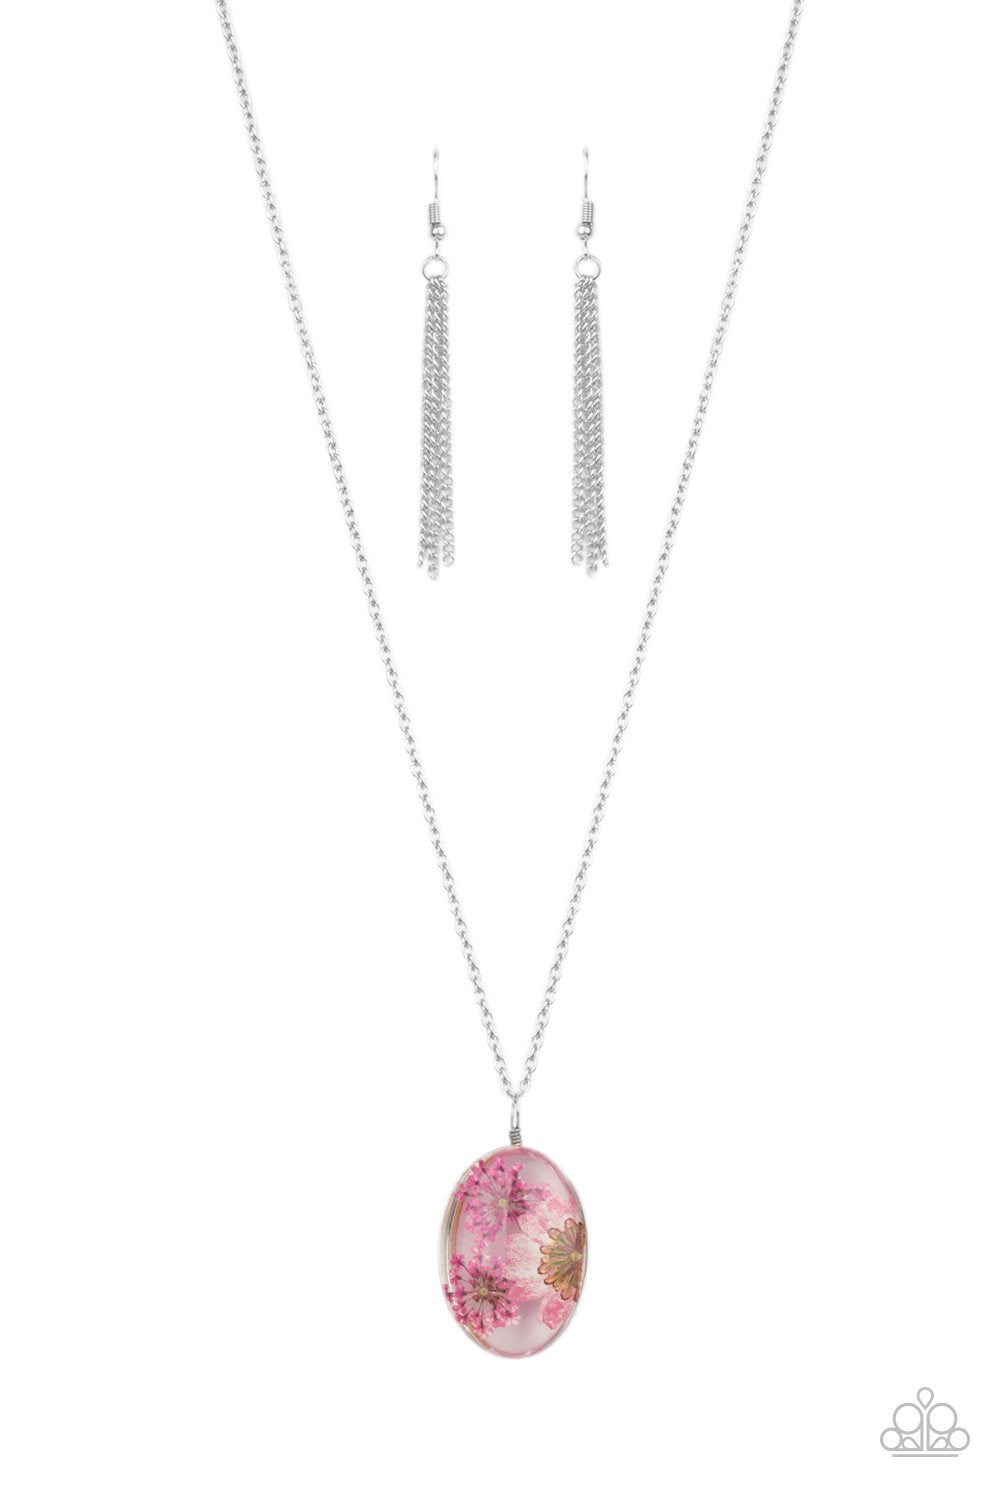 Boho Garden Parties Pink Flower Necklace - Paparazzi Accessories- lightbox - CarasShop.com - $5 Jewelry by Cara Jewels